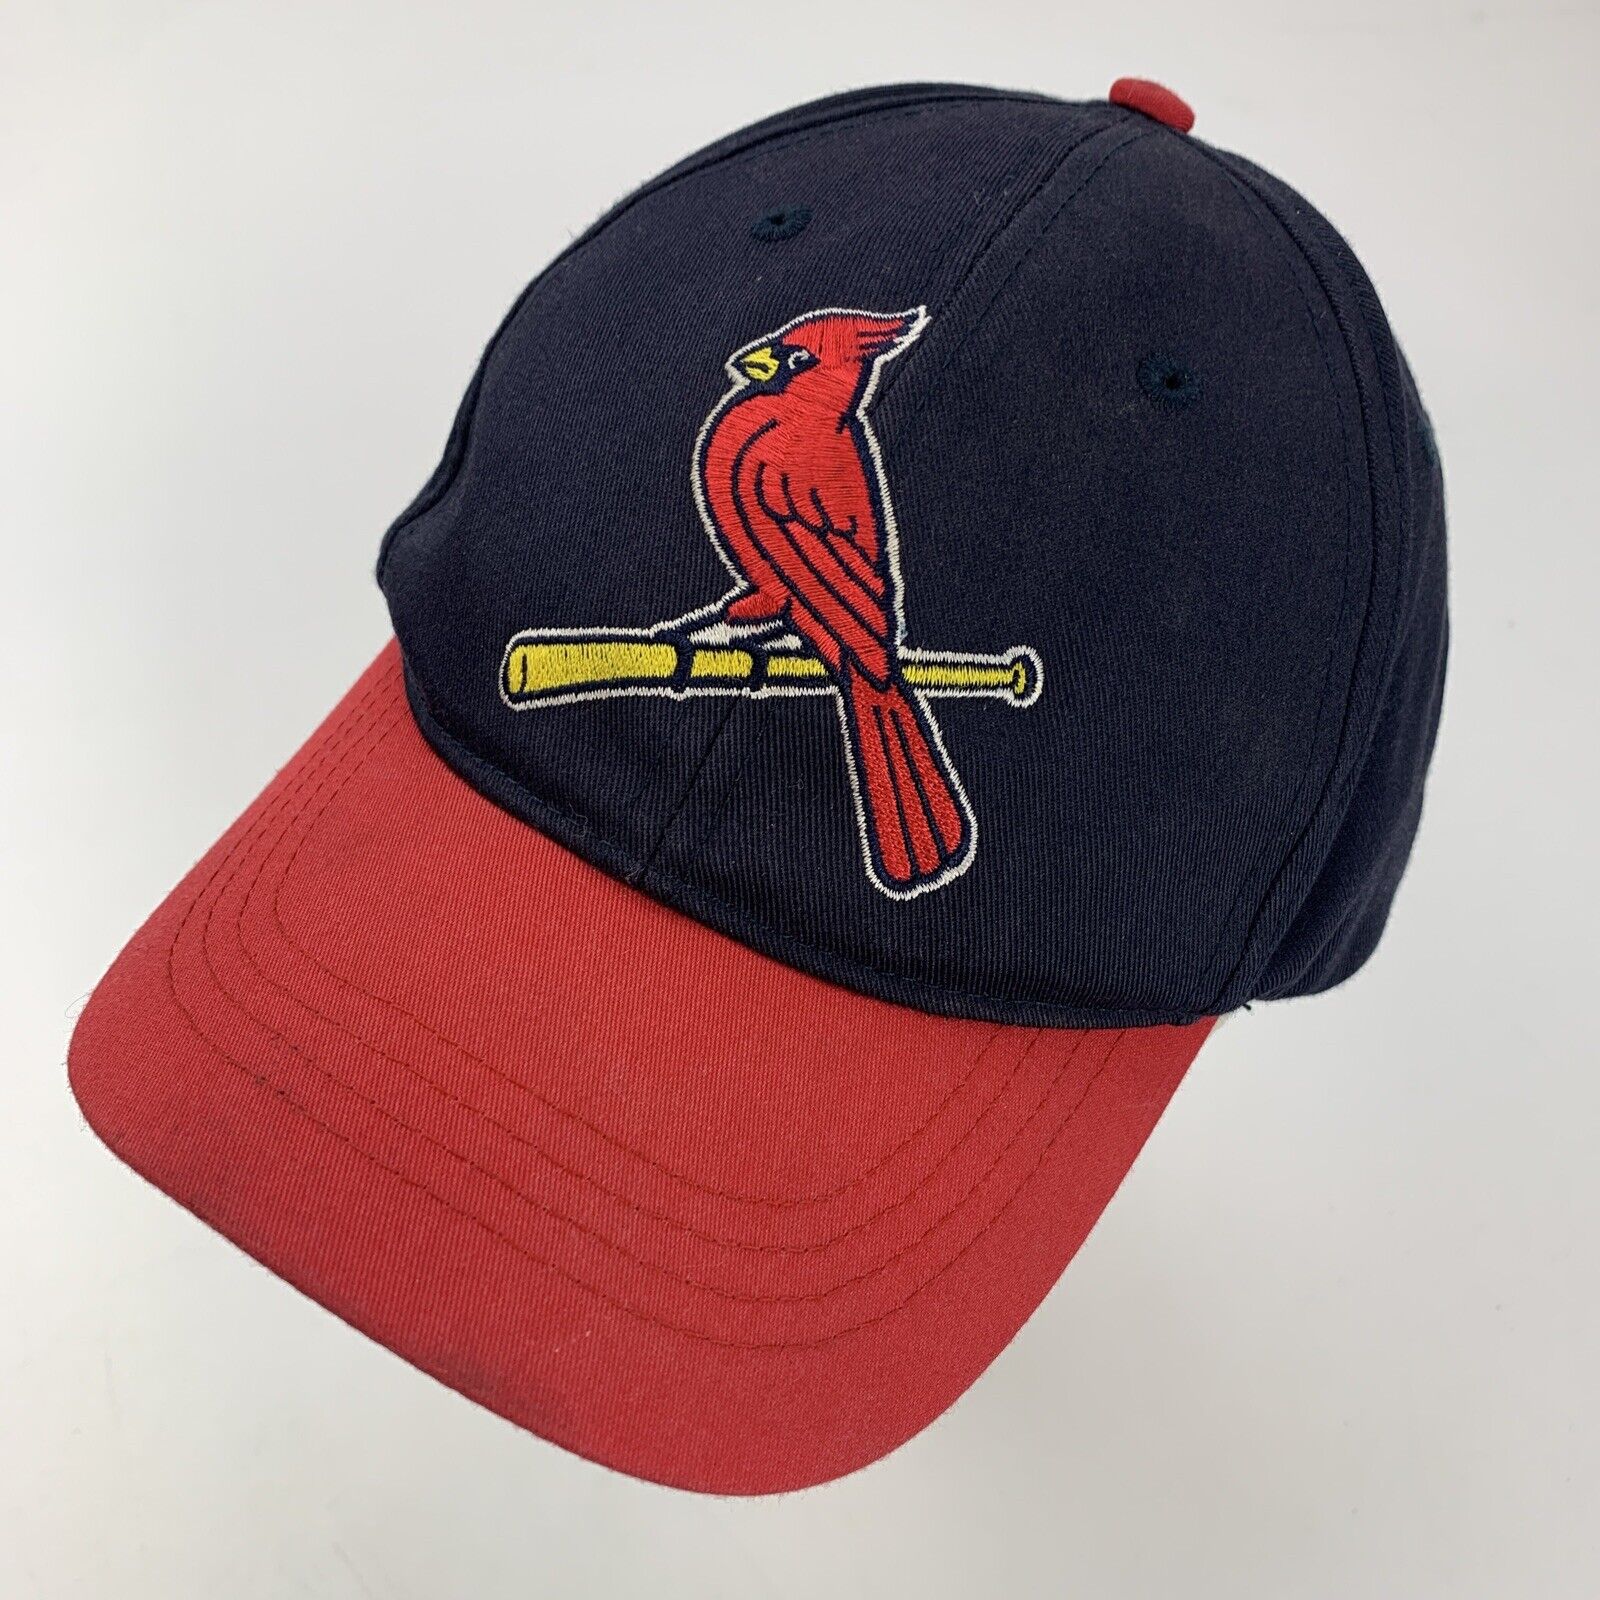 St Louis Cardinals Youth Ball Daily bargain sale Baseball Snapback Cap Hat Sales of SALE items from new works